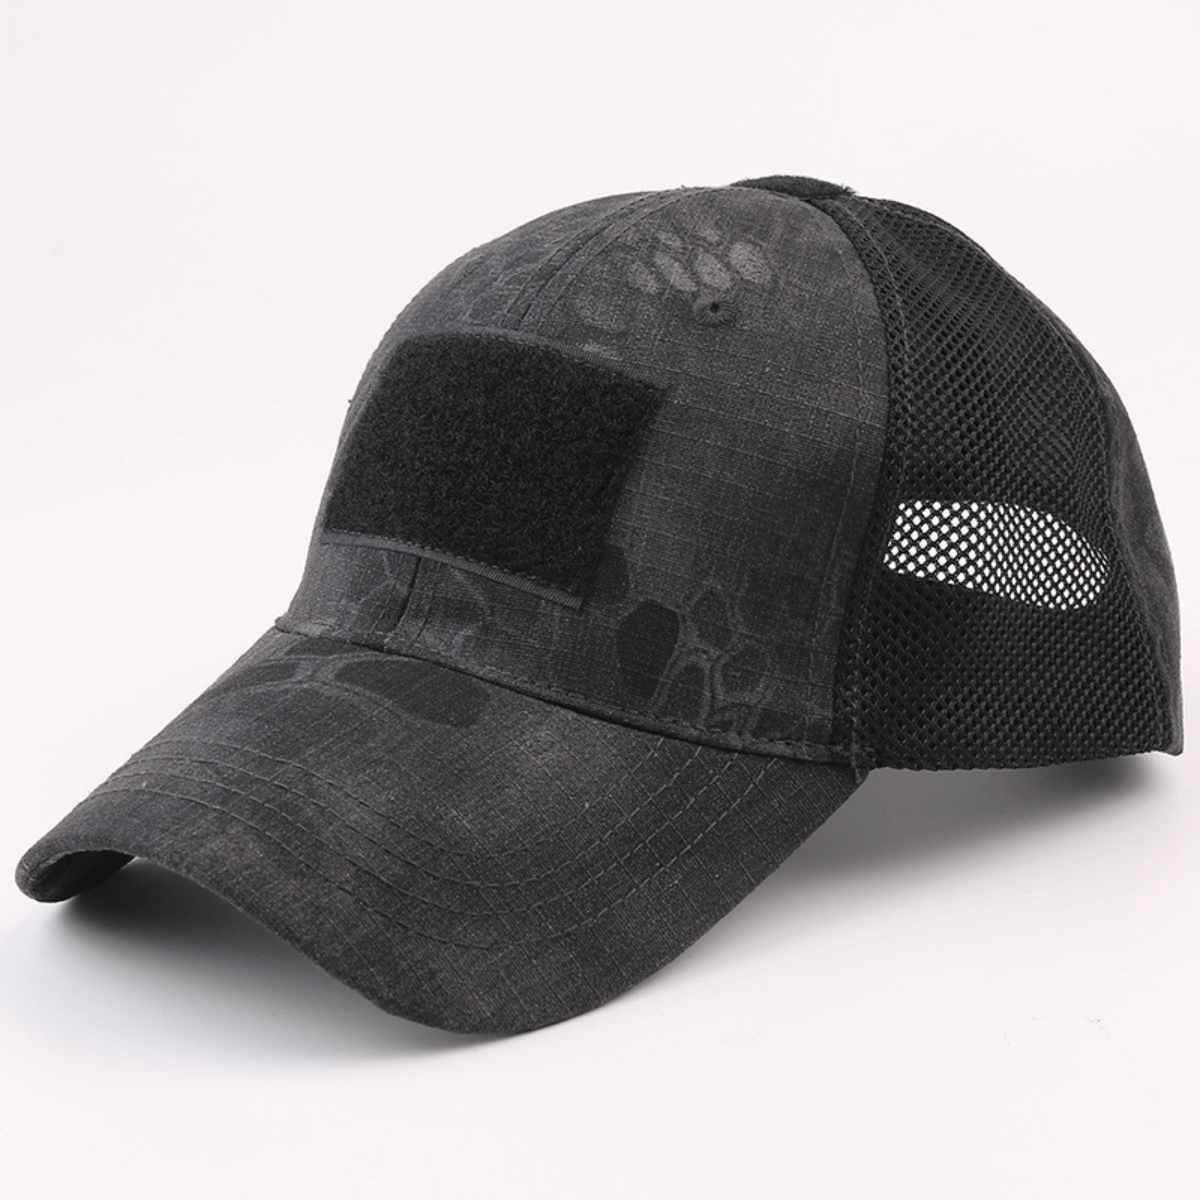 Picture of JupiterGear JG-HAT2-PYTHON Military-Style Tactical Patch Hat with Adjustable Strap (JG-HAT2) Python